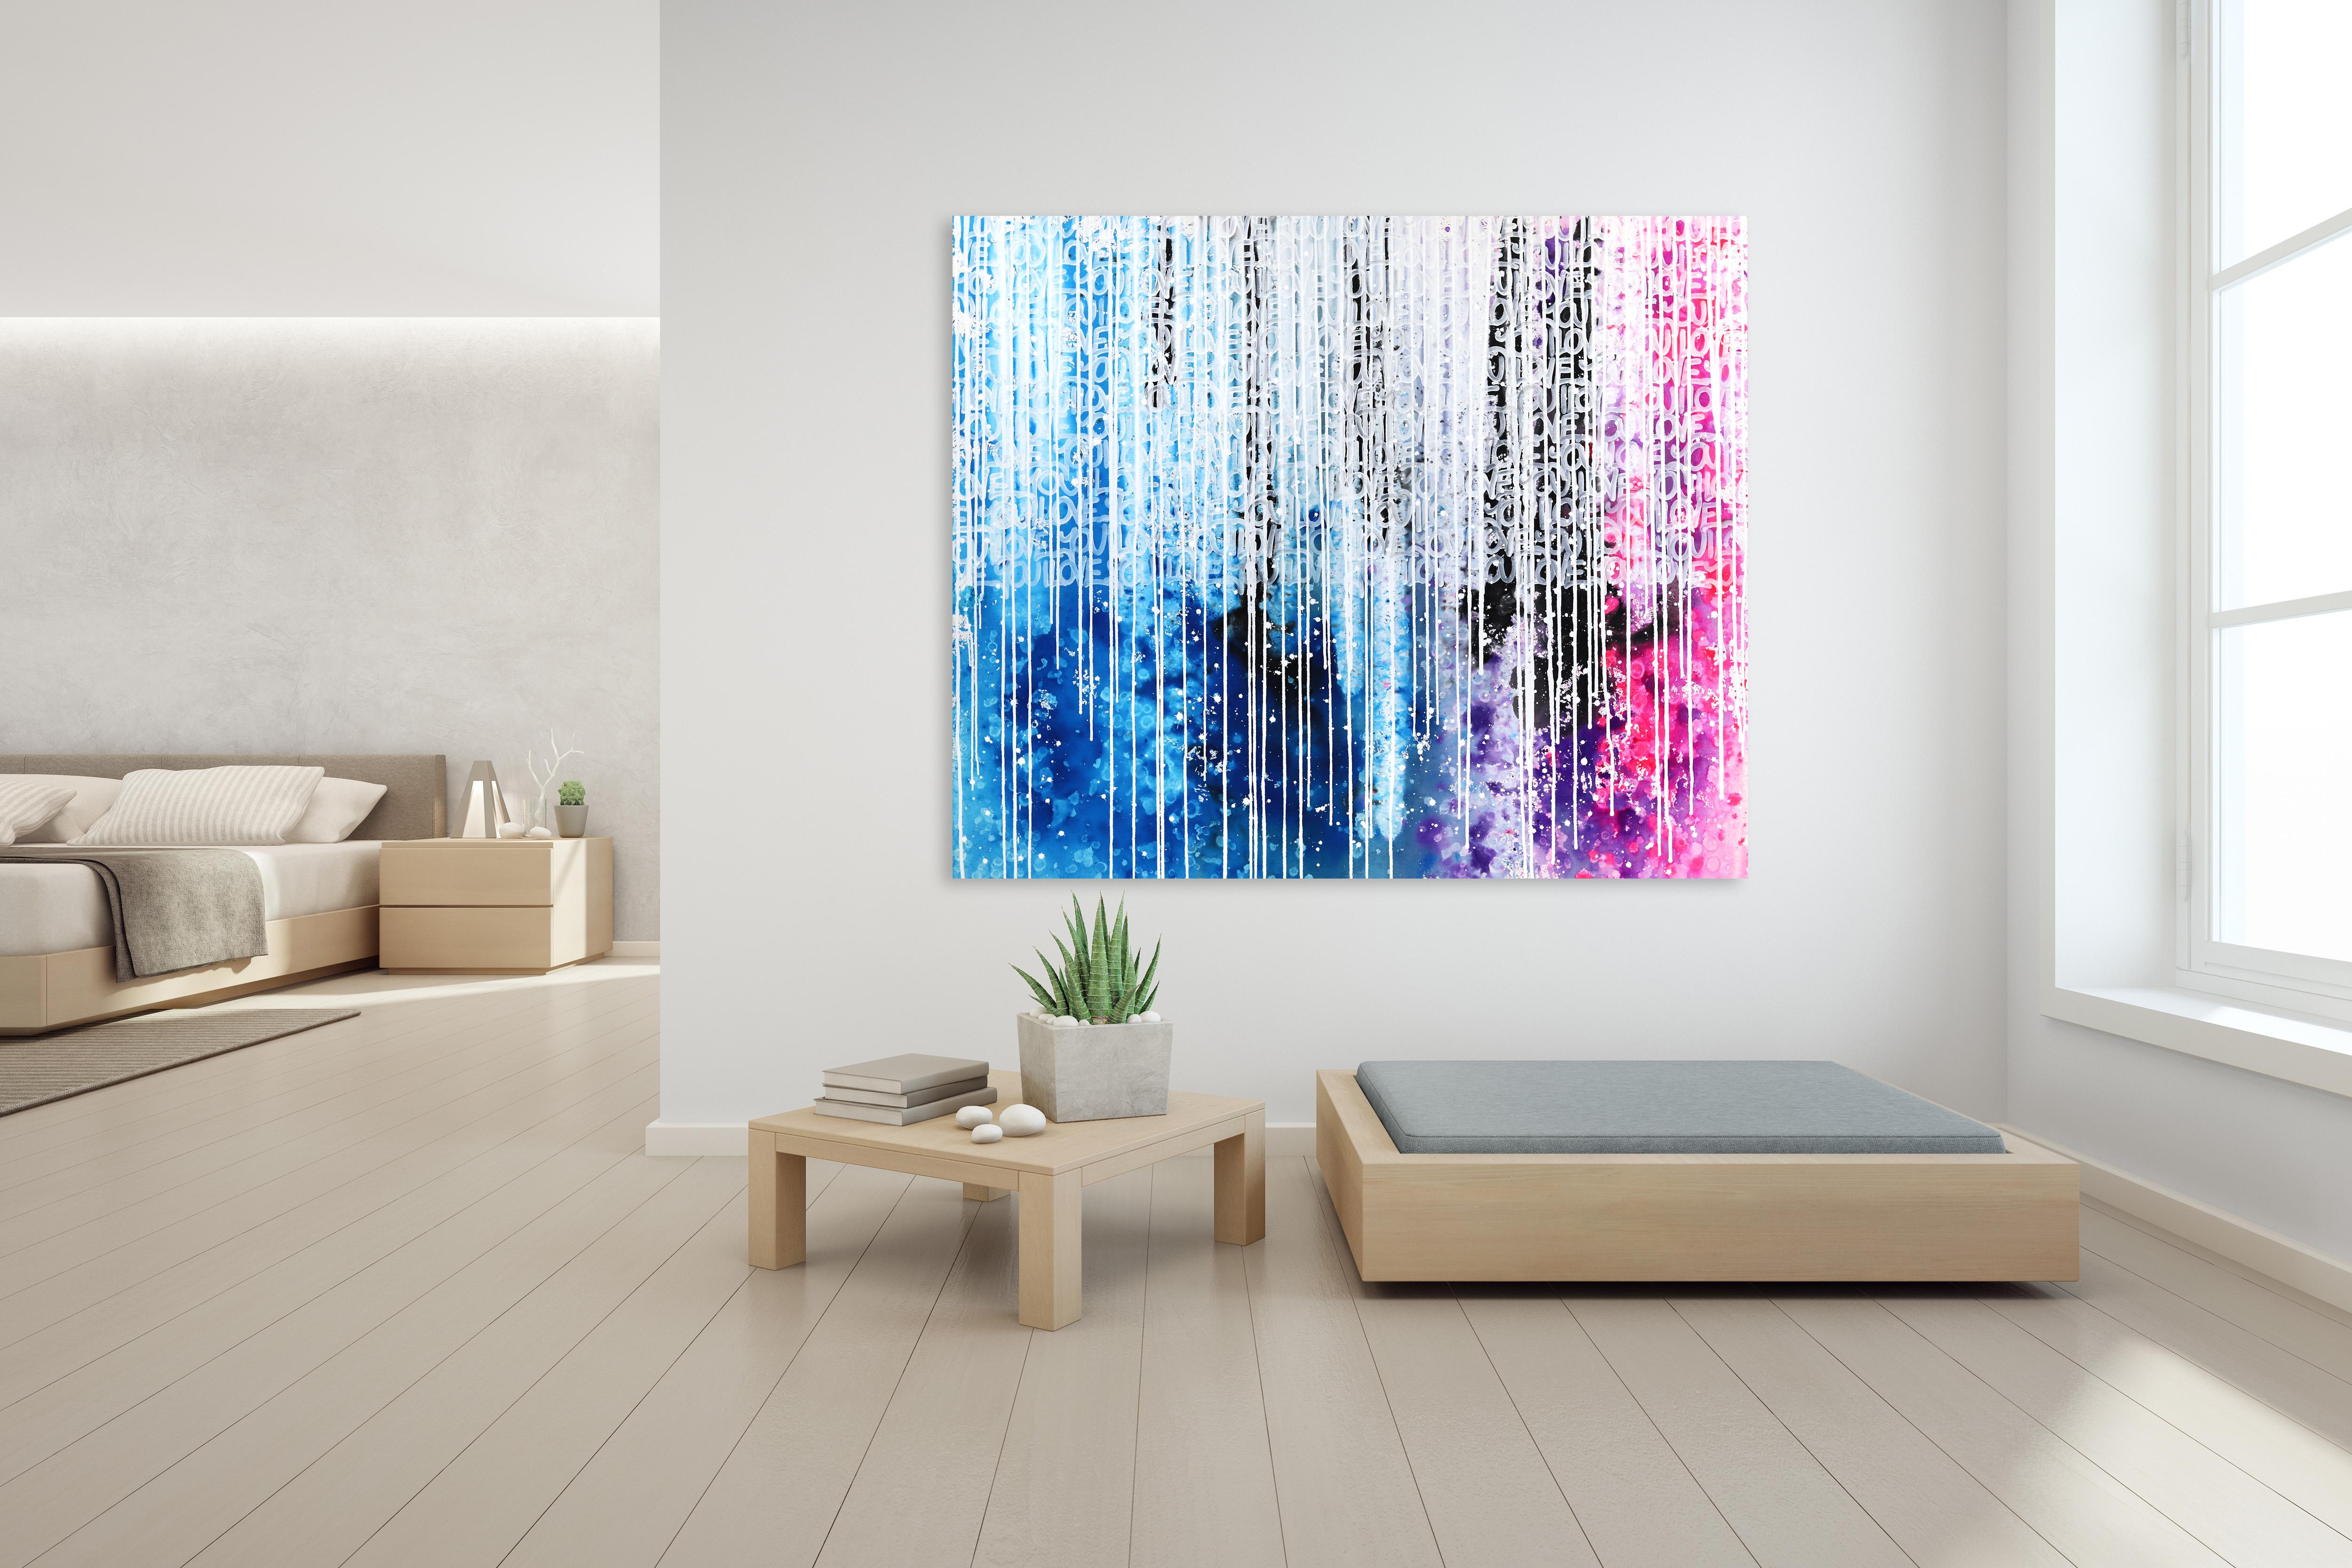 Energetic Flow - Large Oversized Blue Magenta Black White Ethereal Space Artwork - Abstract Mixed Media Art by Amber Goldhammer